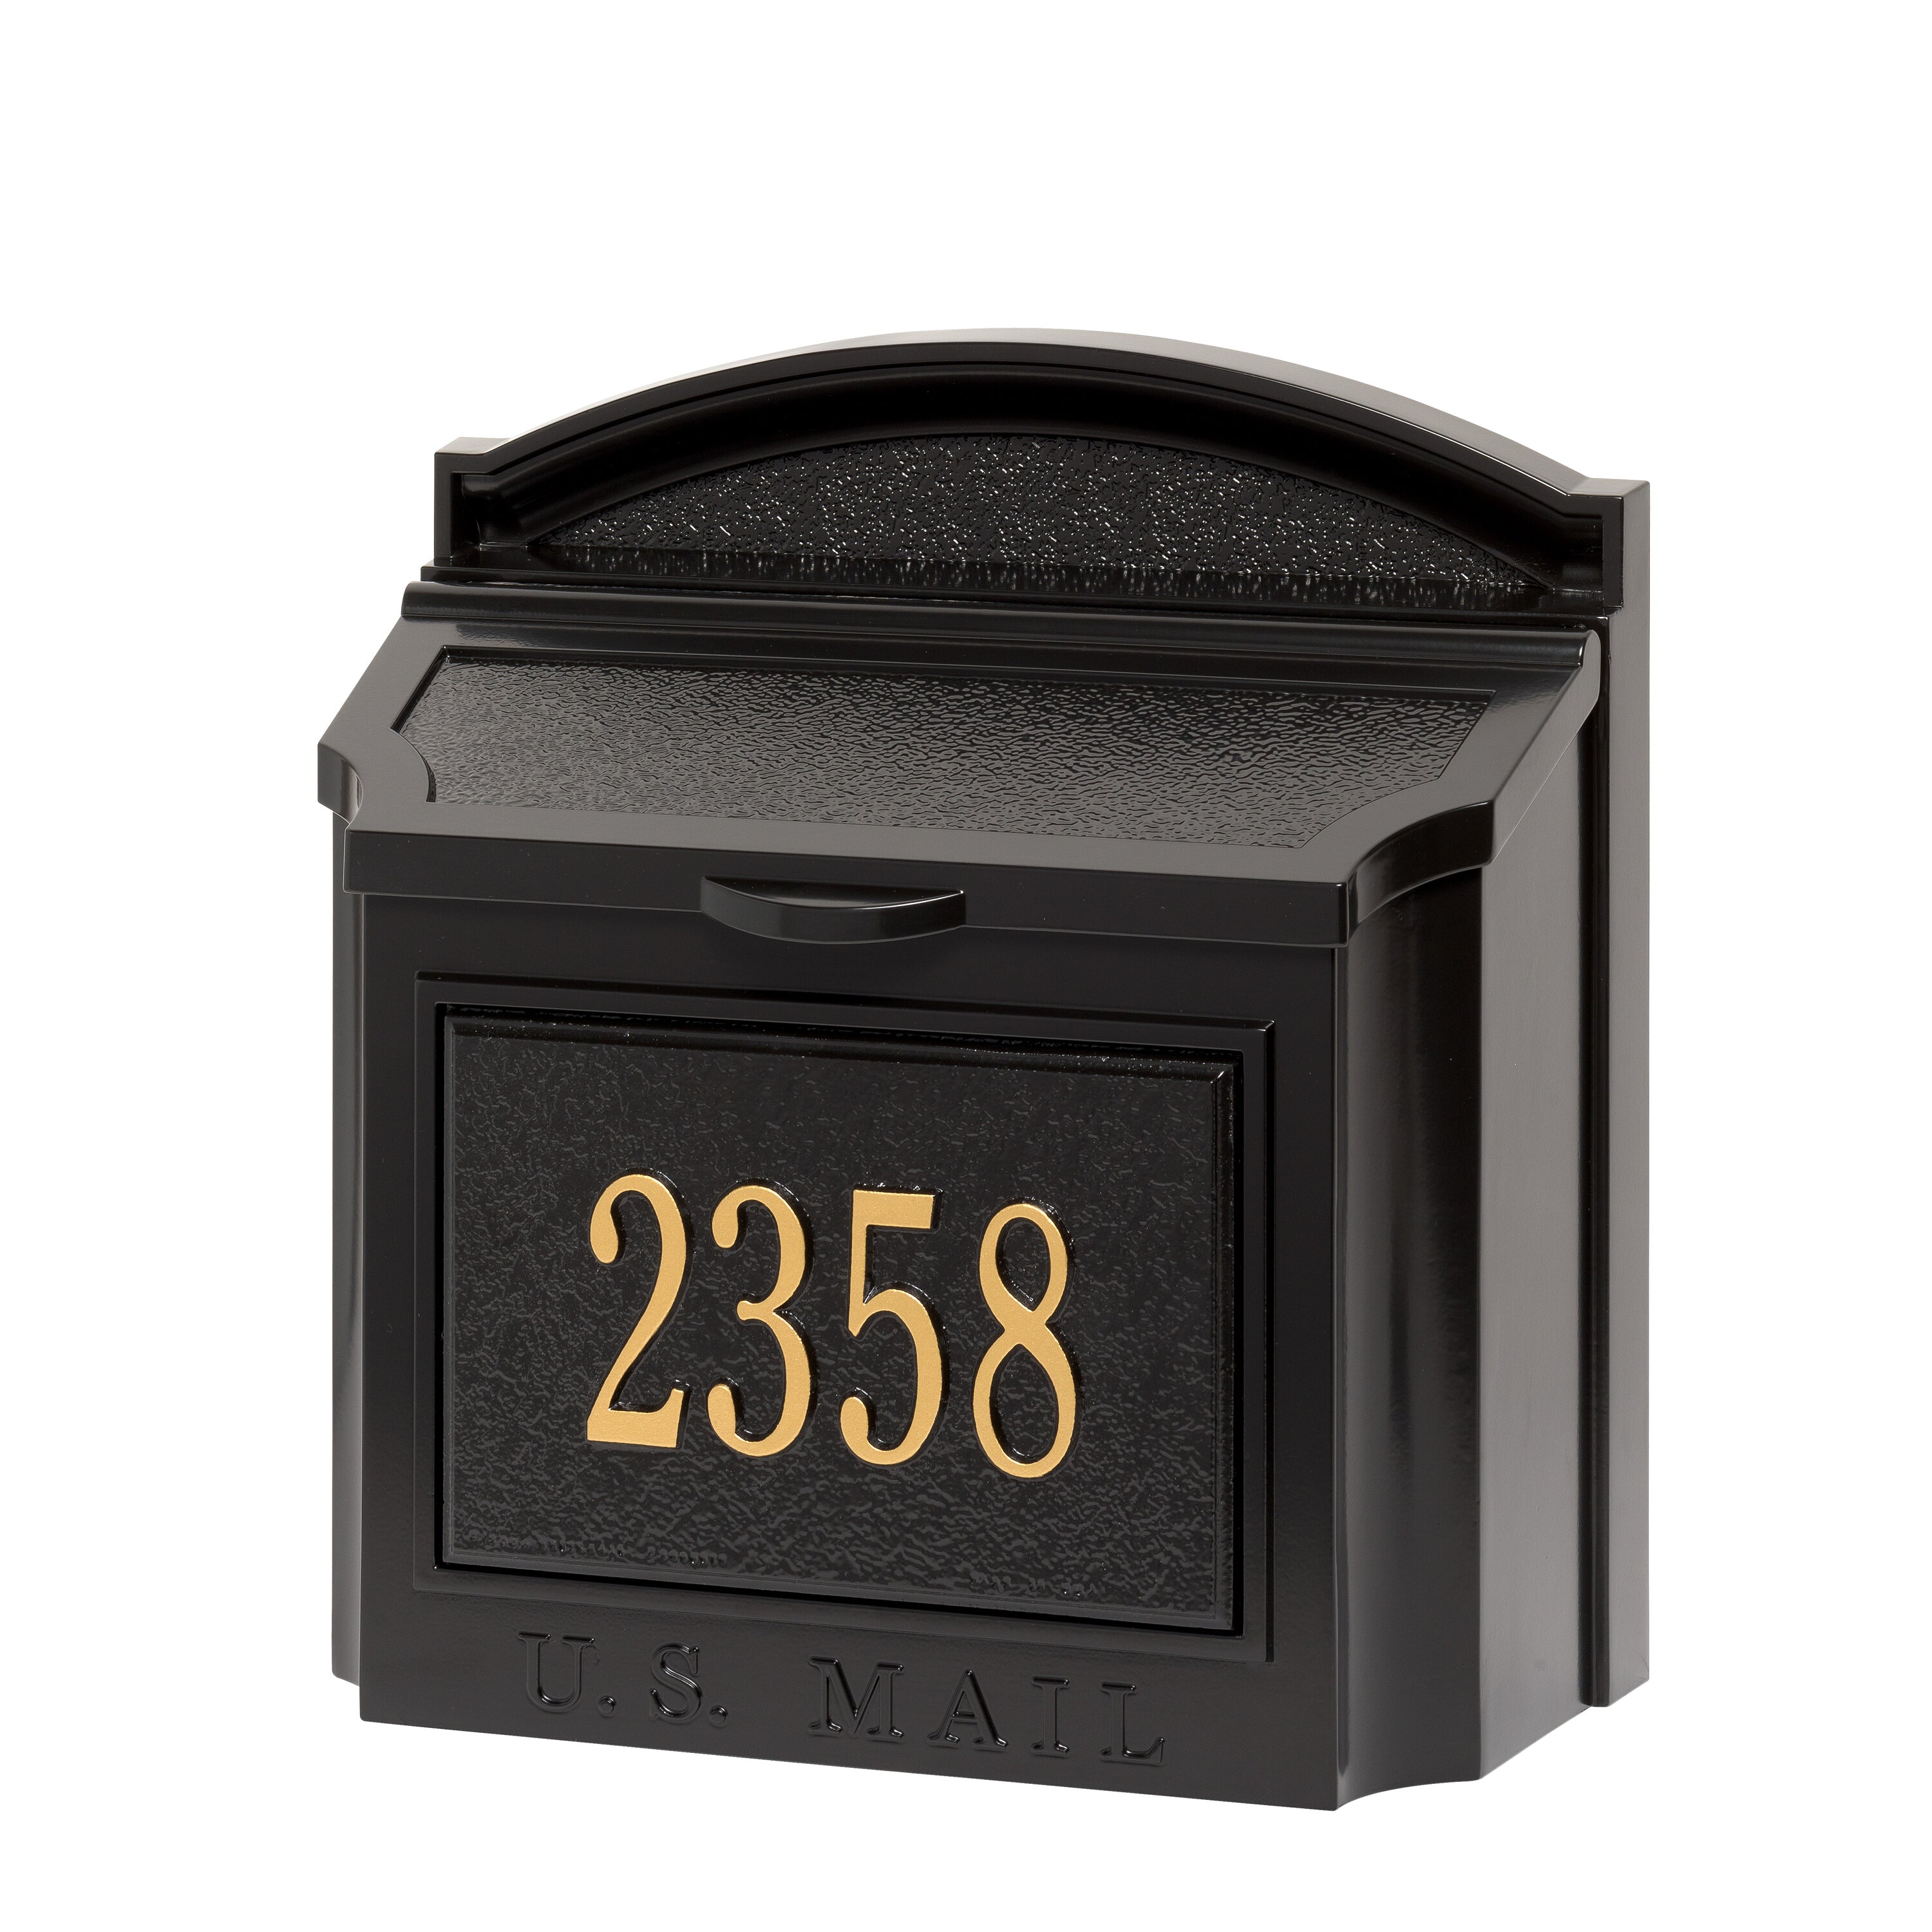 Whitehall Wall Mailbox Package MailboxEmpire Reviews on